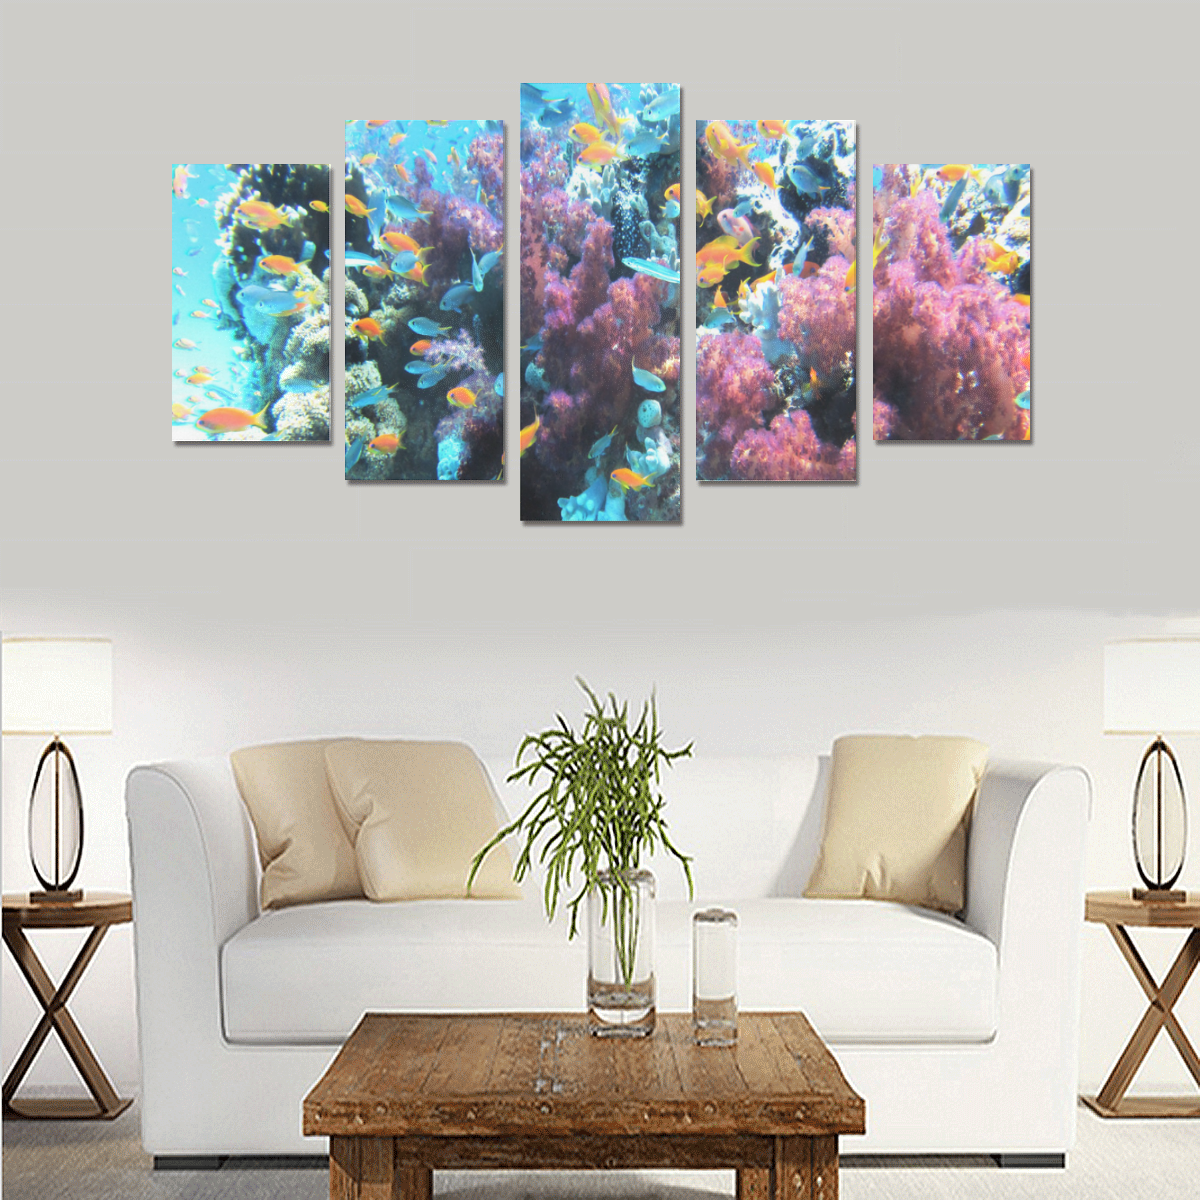 Coral Reef Saltwater Fantasy Canvas Print Sets A (No Frame)